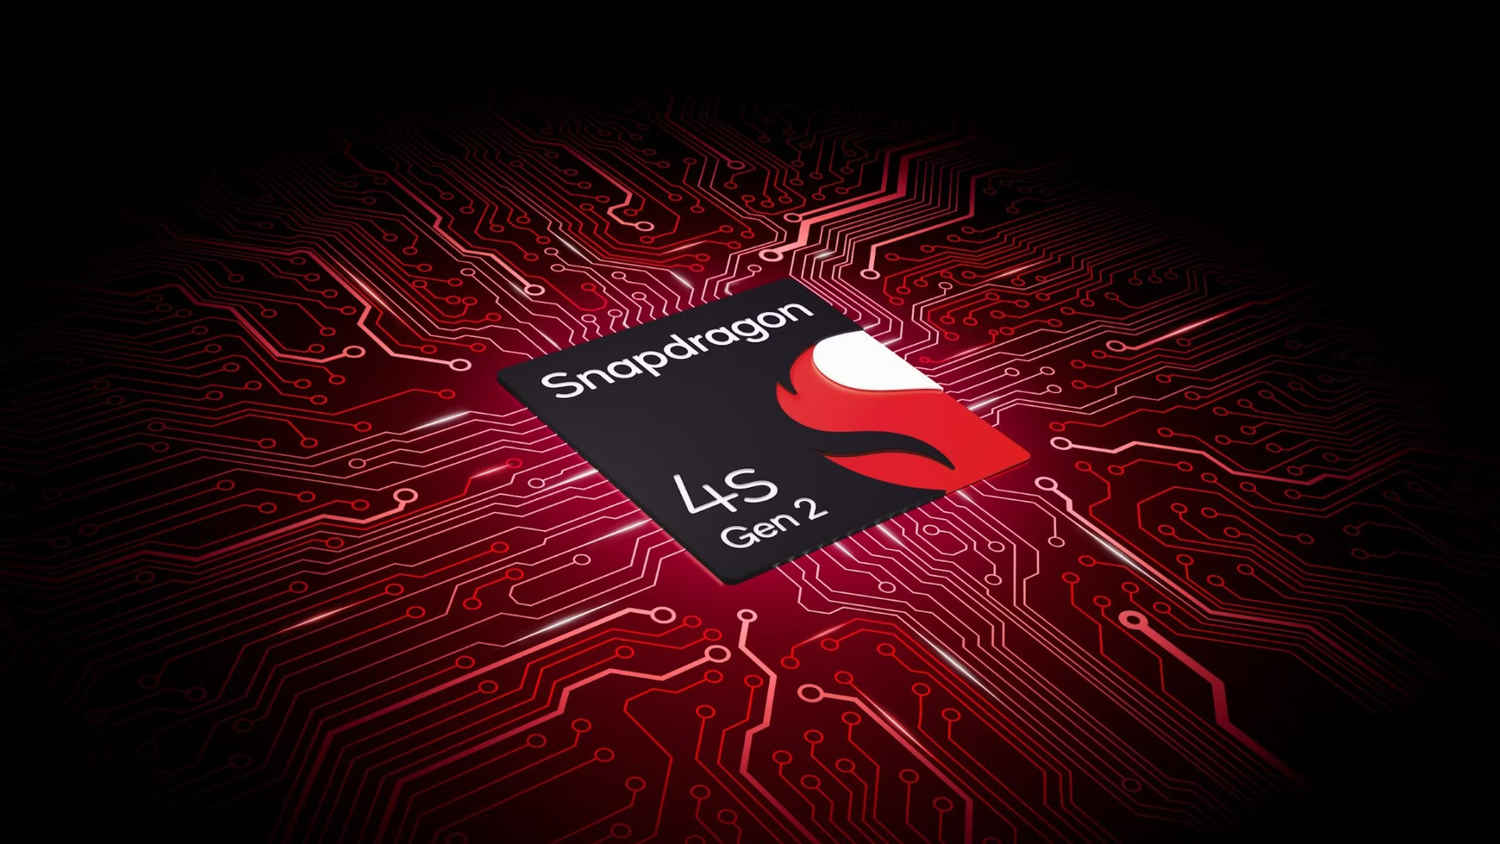 Snapdragon 4s Gen 2 processor launched for entry-level 5G phones: Details, availability, and more